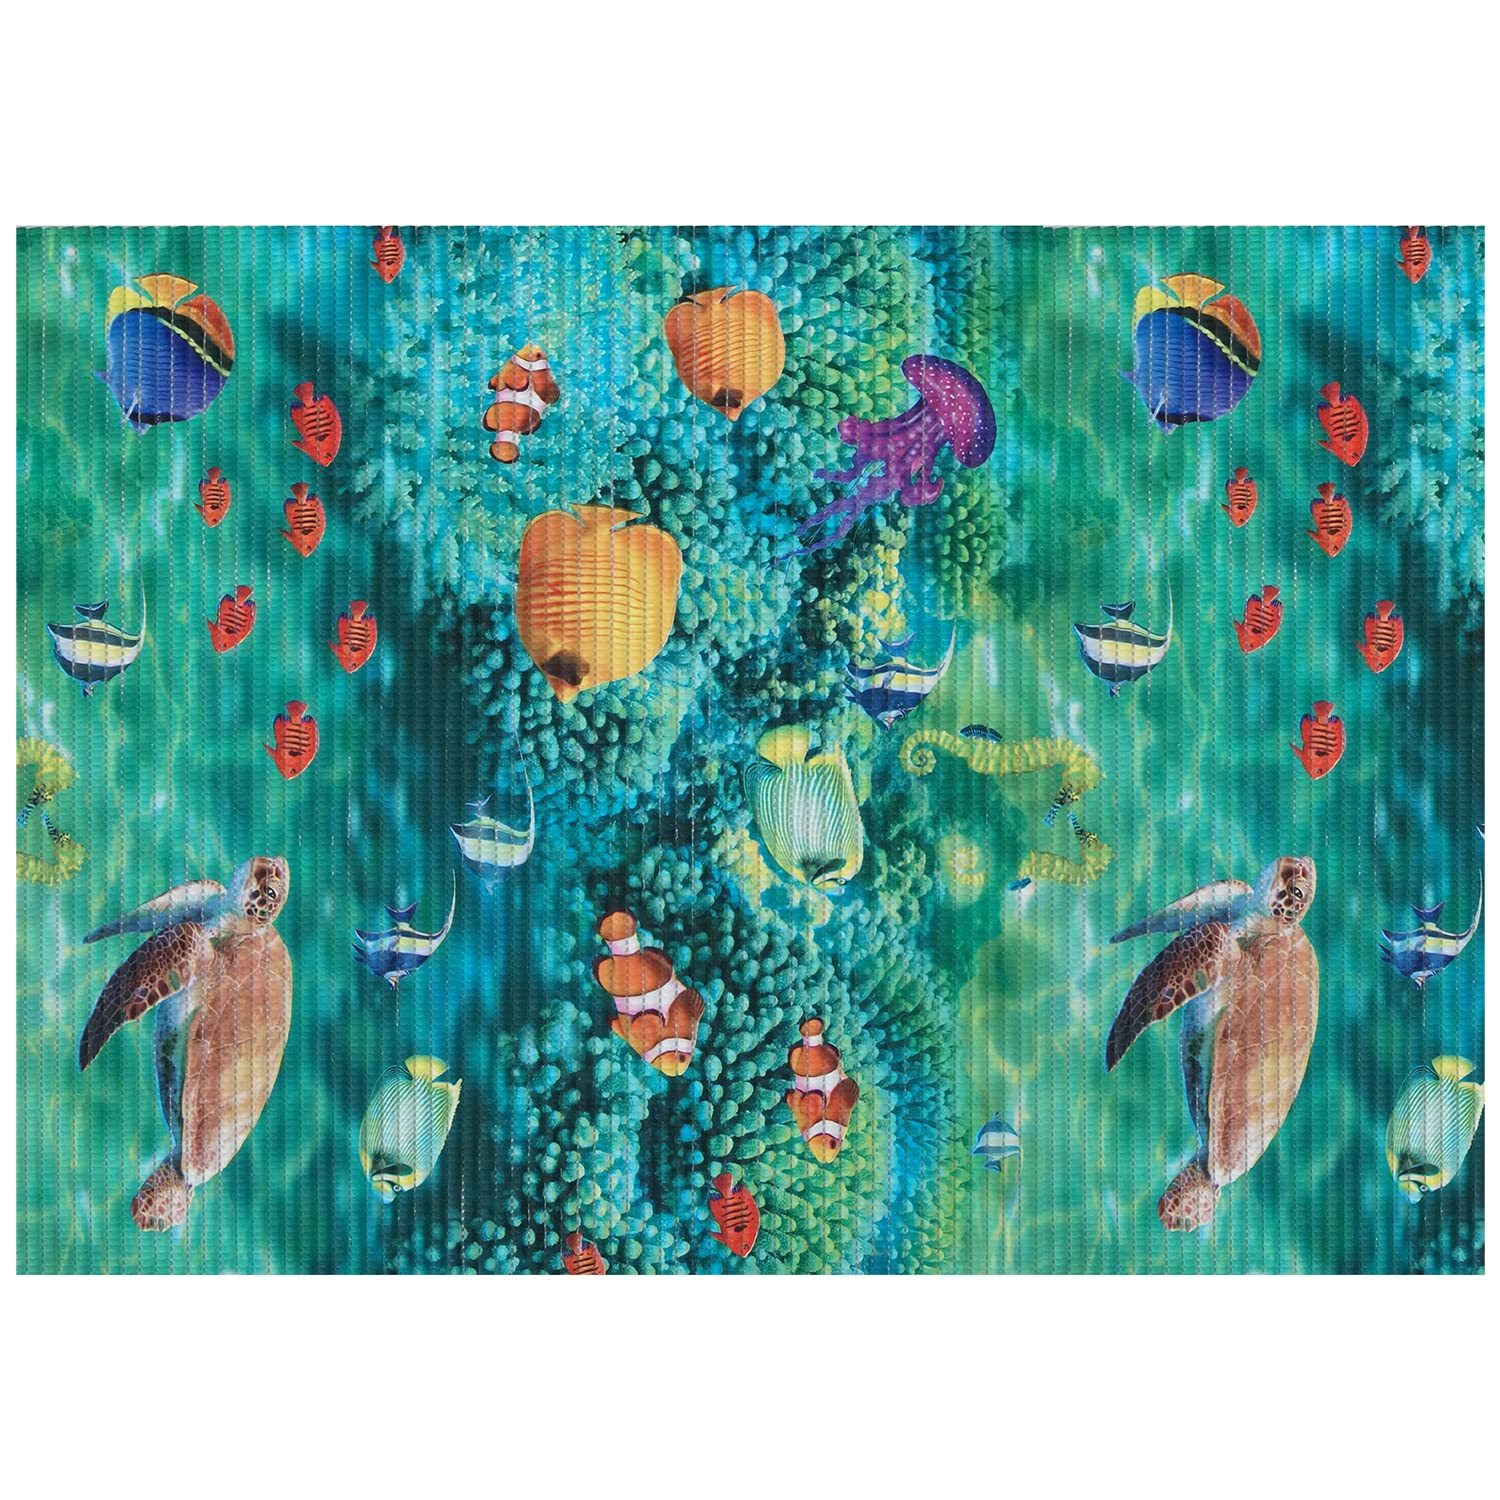 Primary image for Dundee Deco Sea Creatures Bathroom Mat - 39" x 26" Blue Waterproof Non-Slip Quic